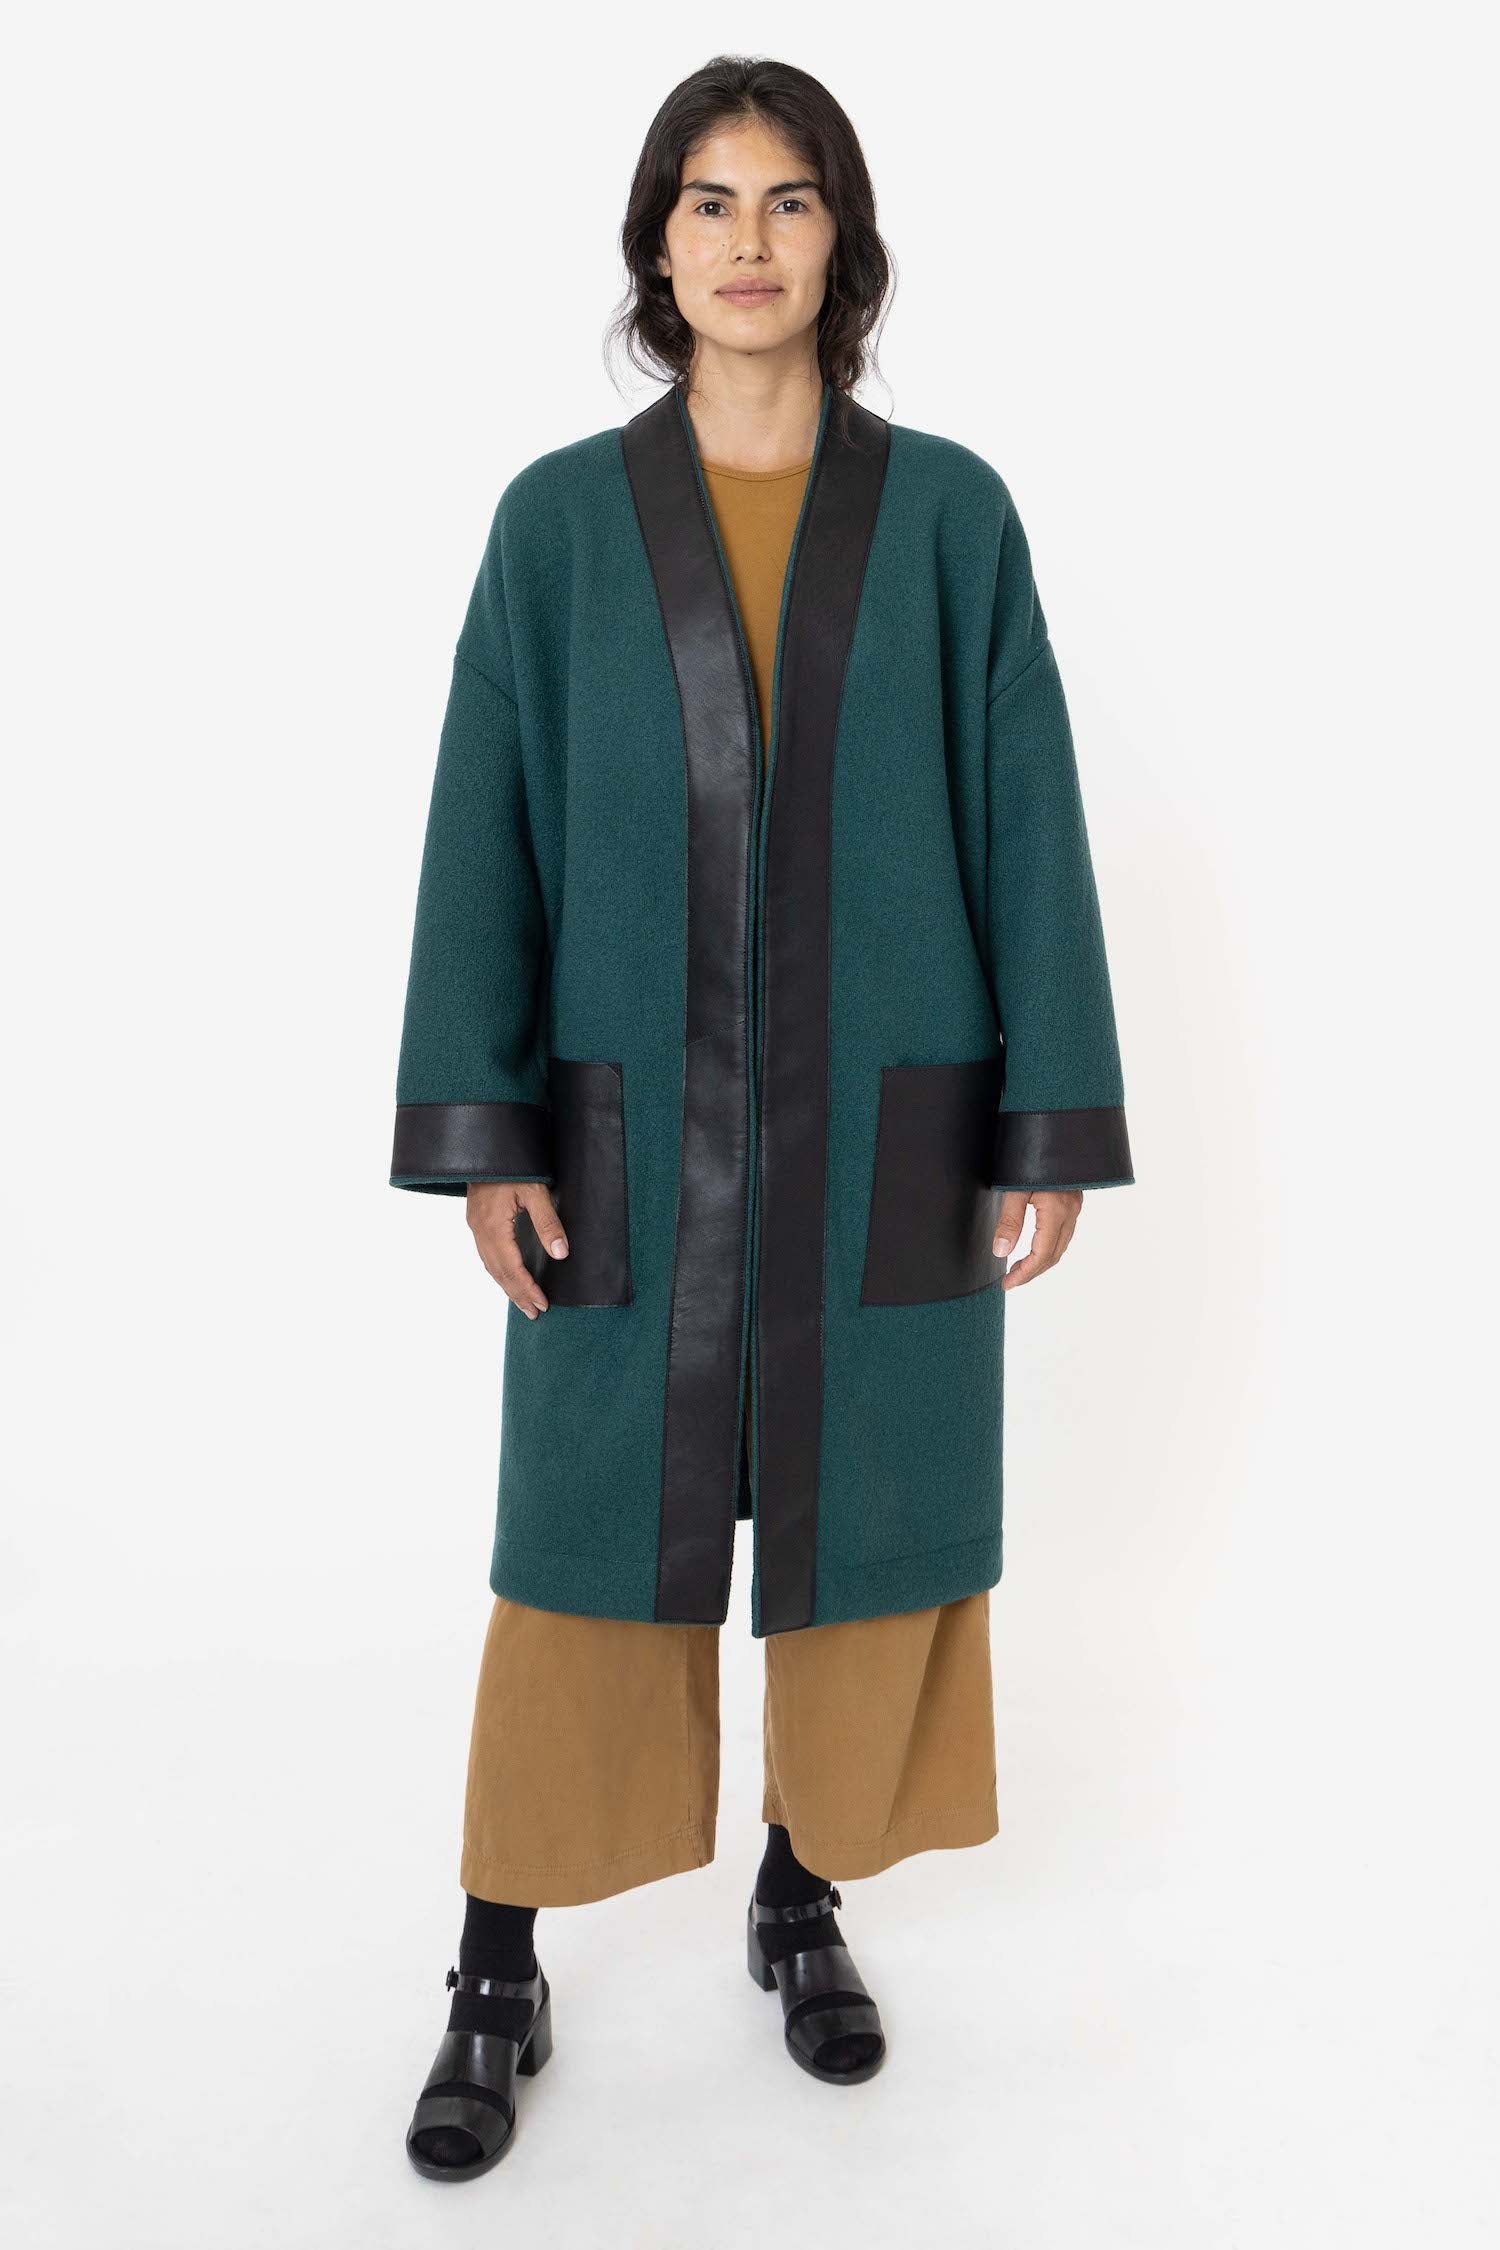 RWL100 - Wool Coat with Leather Trim